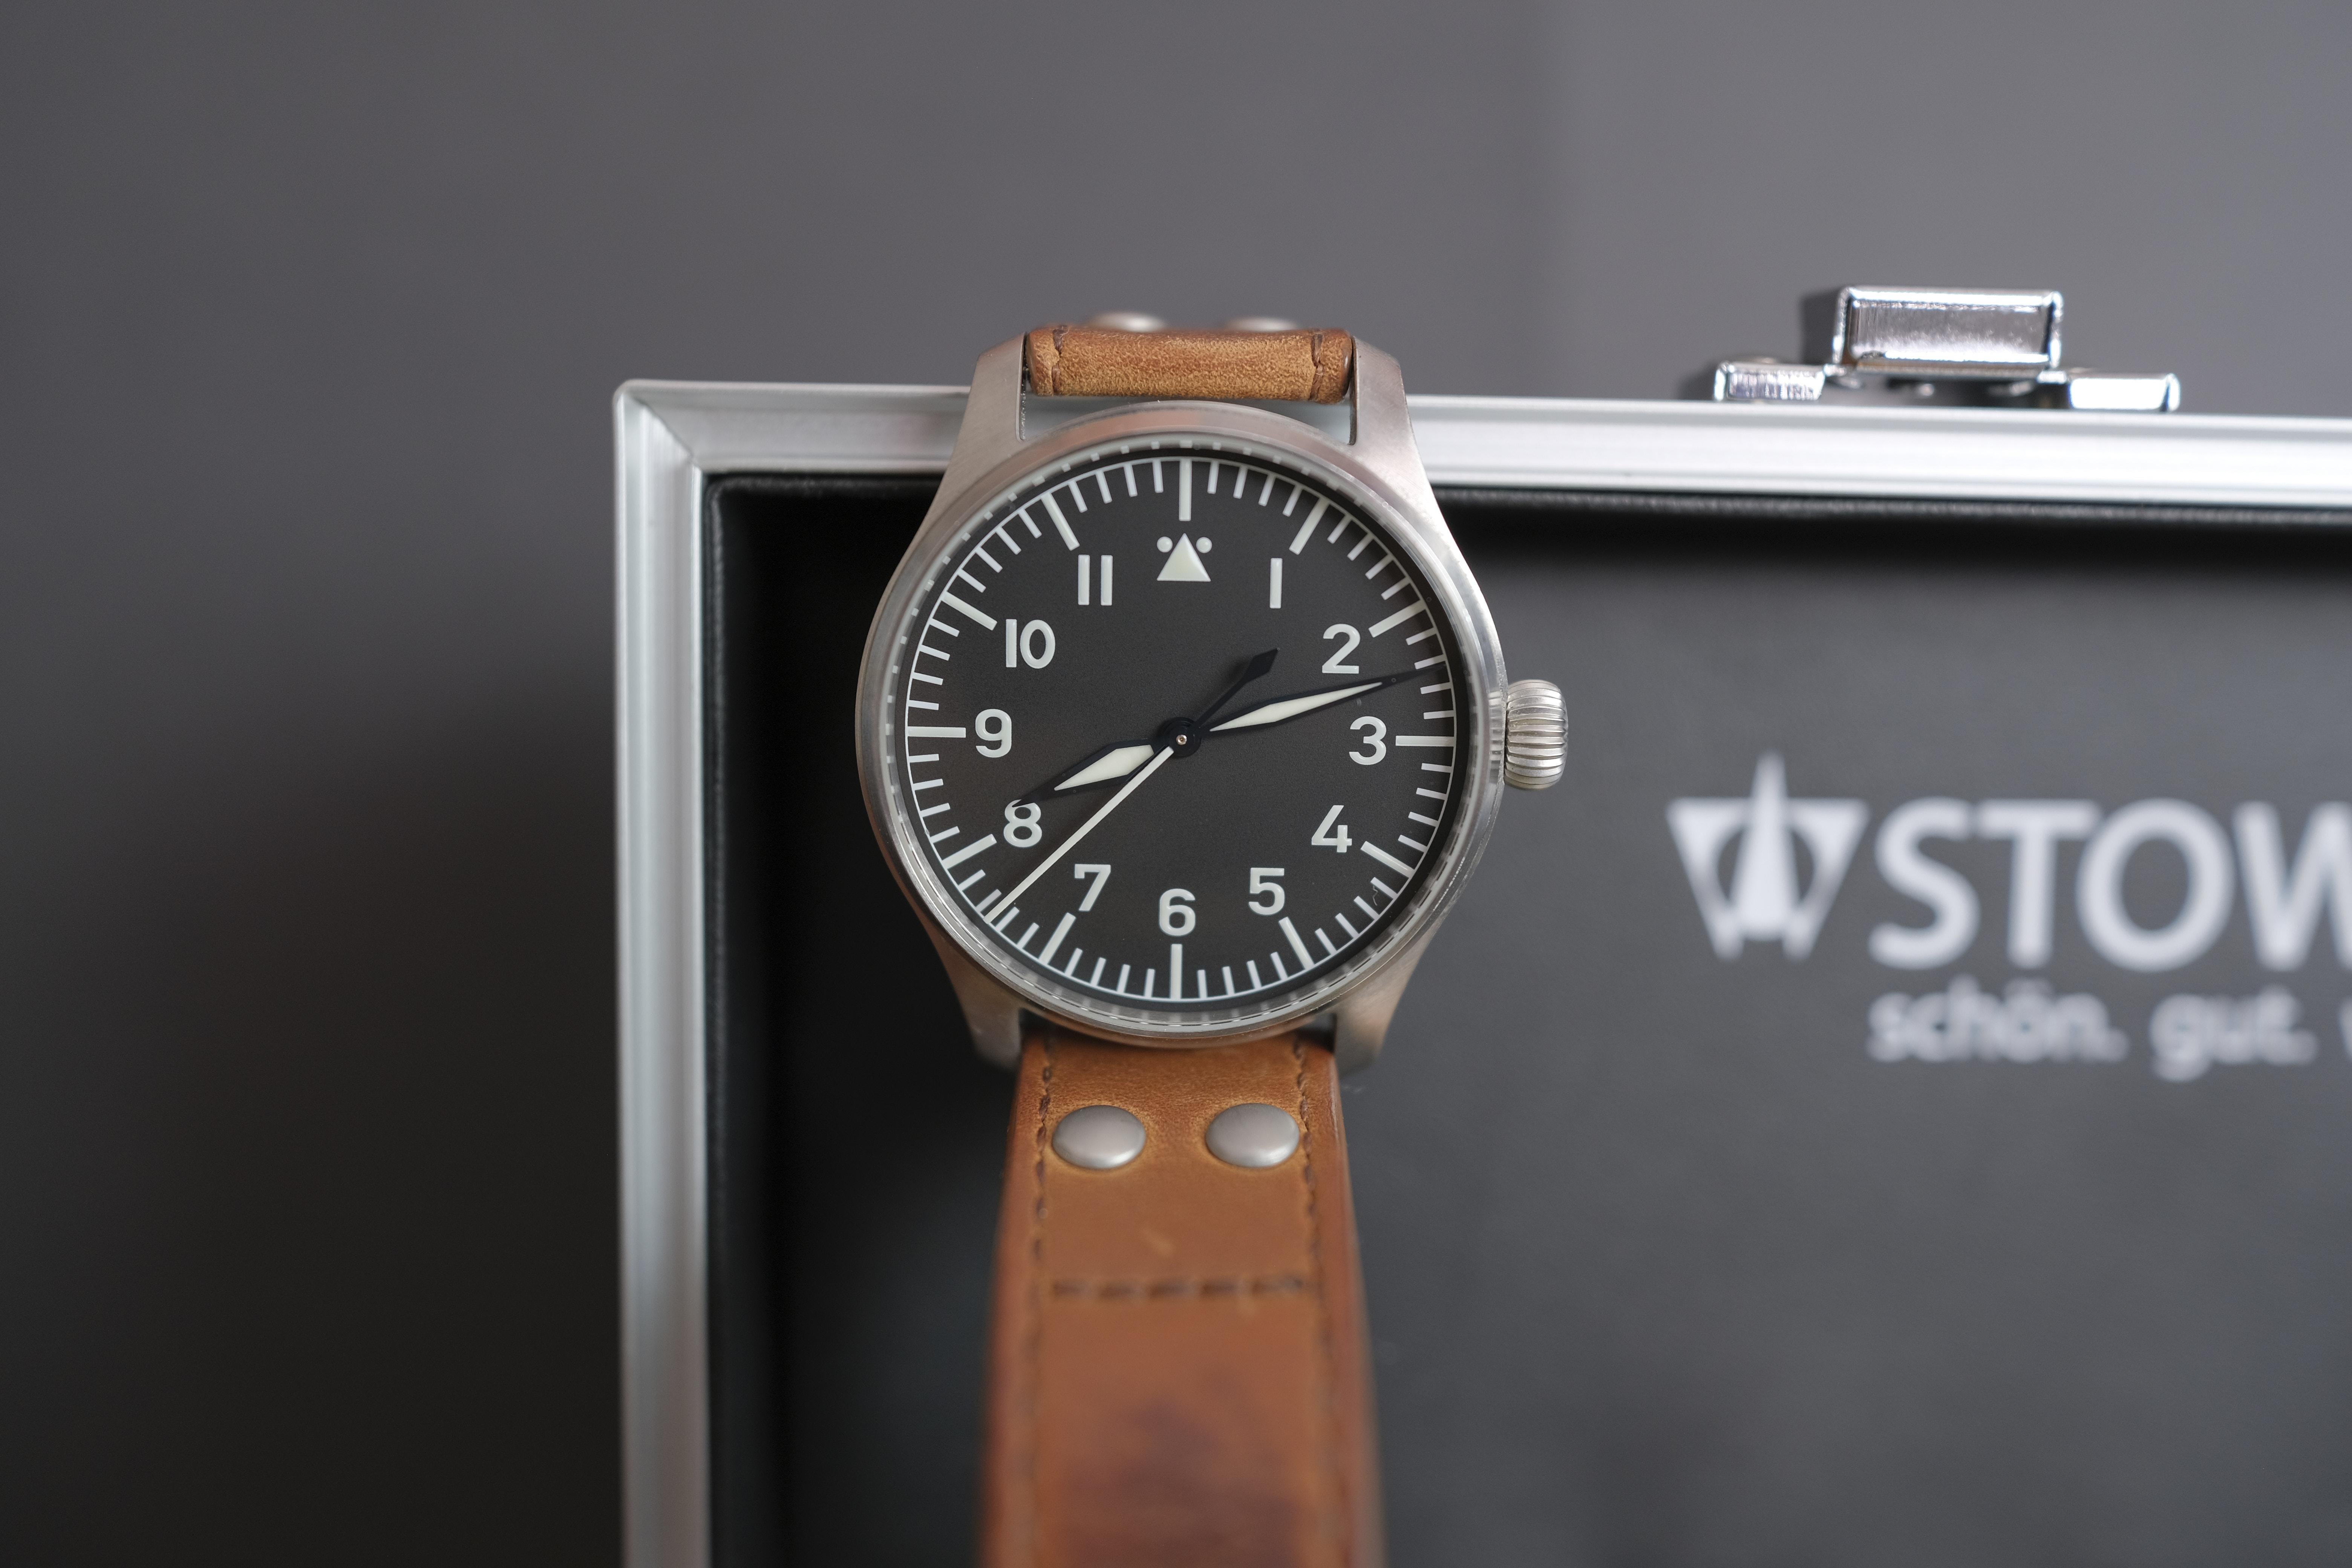 Tisell] 40 mm Flieger Updated Review : r/Watches